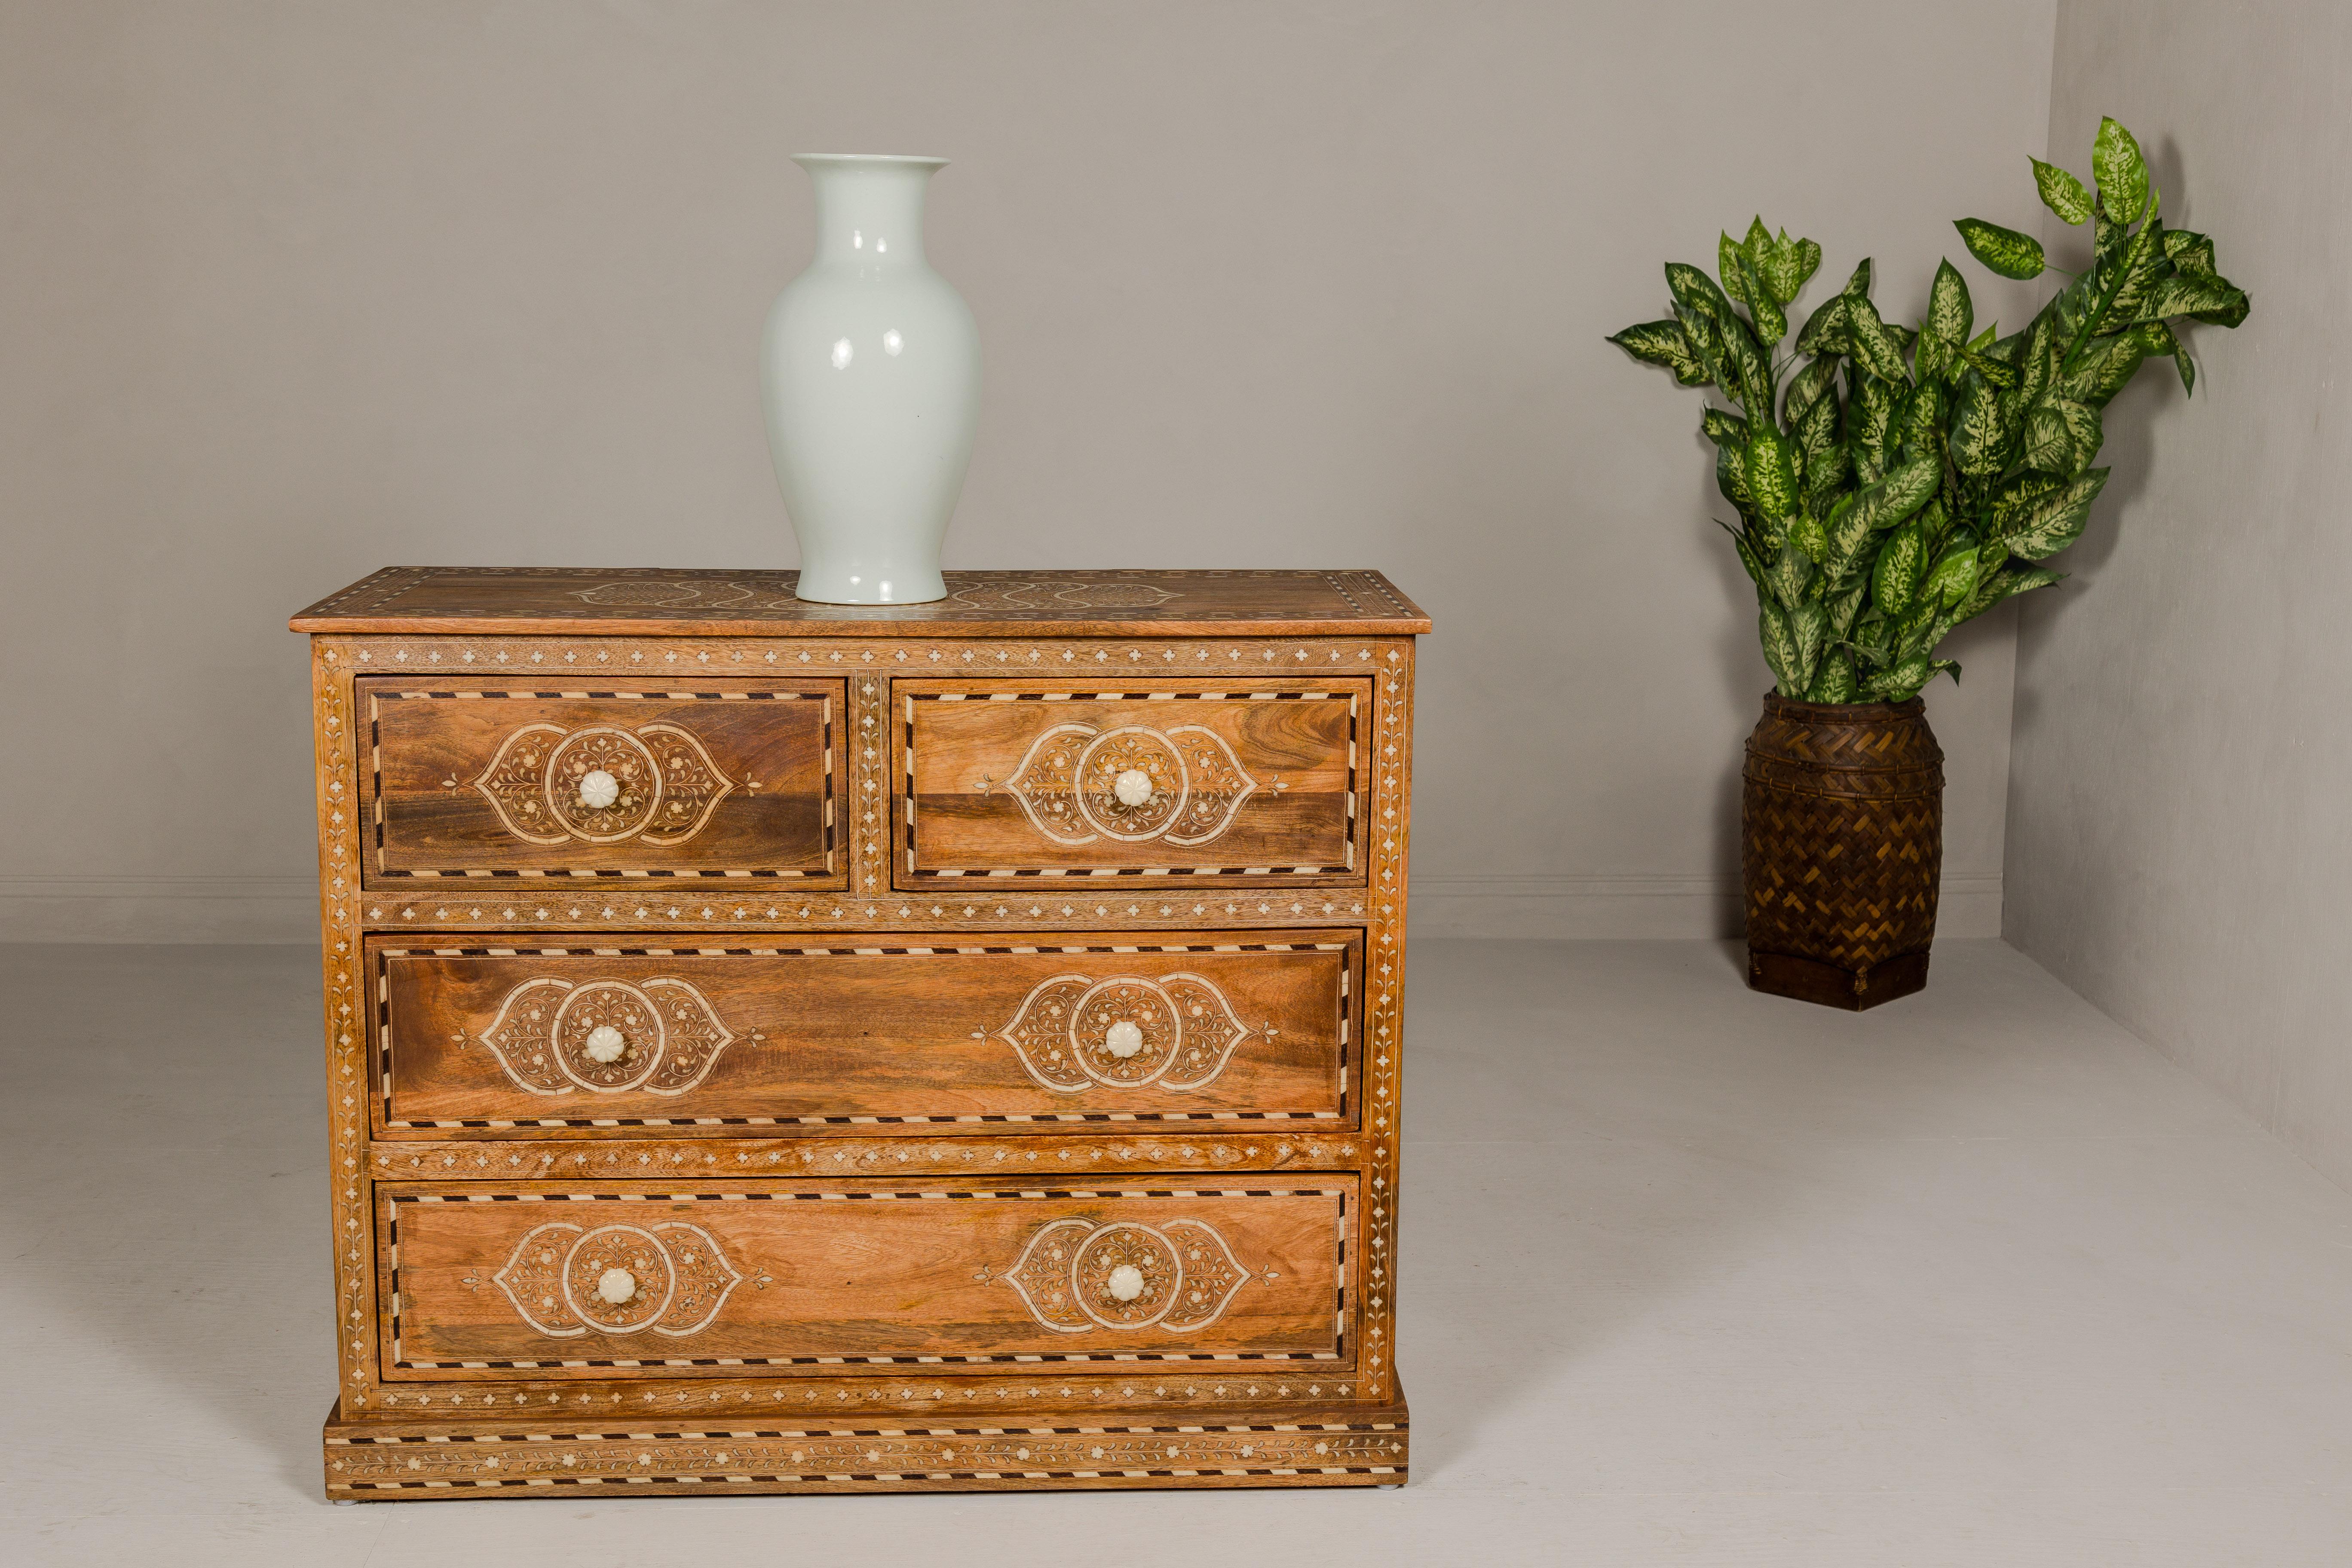 Anglo Indian Style Mango Wood Chest with Four Drawers and Floral Bone Inlay For Sale 3